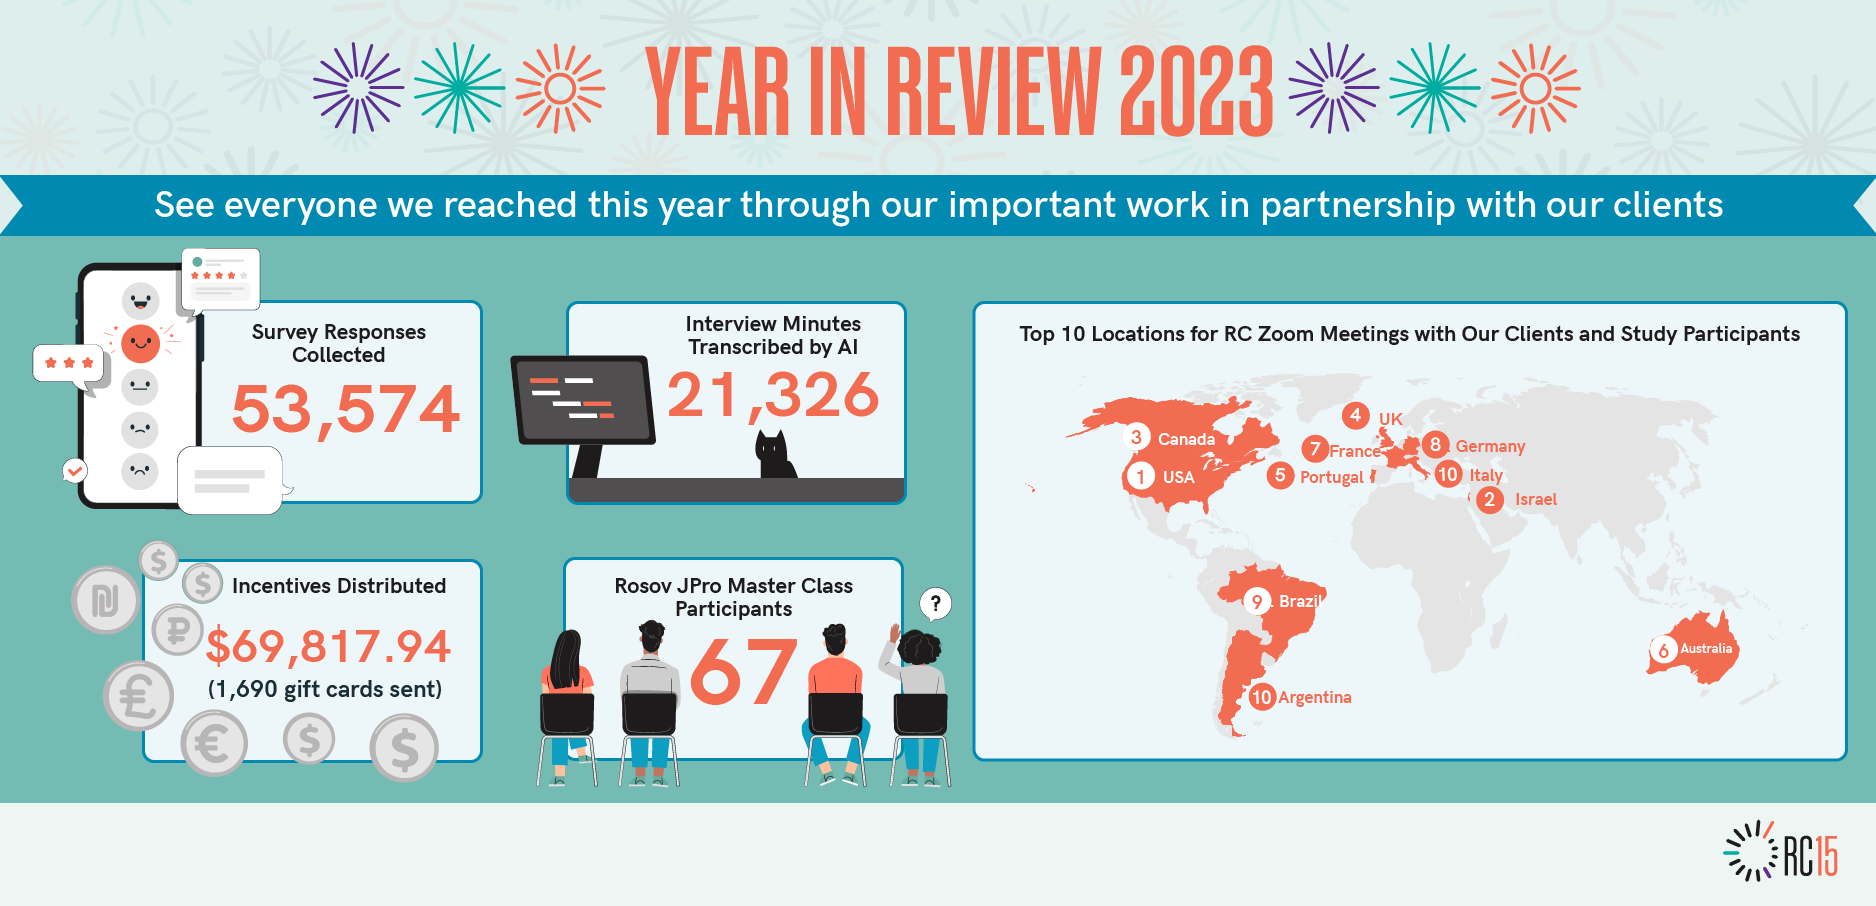 This is an infographic with some stats from Rosov Consulting's 2023.